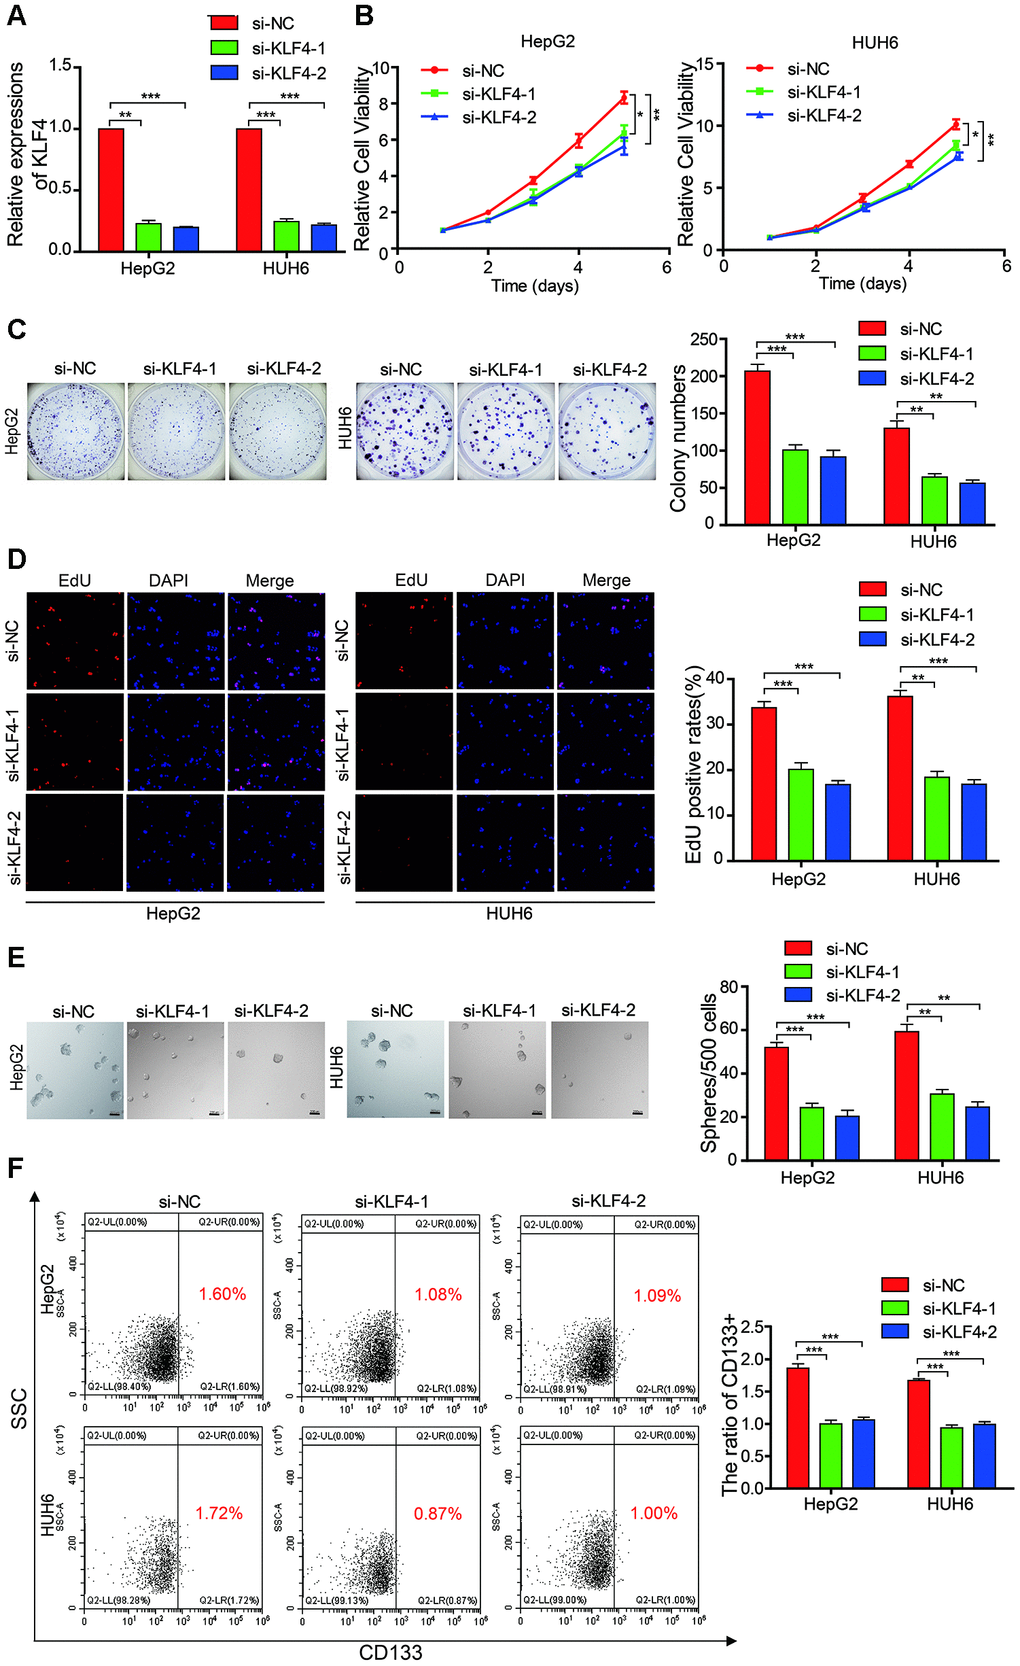 KLF4 affects the proliferation and stemness abilities of HB cells. (A) qRT-PCR analysis of KLF4 mRNA in HB cells that were treated with siRNAs; (B–D) The cell proliferative ability was assessed by the Cell Counting Kit-8 (CCK-8), colony formation assay, and EdU assay after KLF4 was knocked down in HepG2 and HUH6 cells; (E) The stemness of cancer stem cells (CSCs) was assessed by the sphere-forming assay after KLF4 was knocked down in HepG2 and HUH6 cells; (F) The proportion of CD133+ cells was determined by flow cytometric analysis after KLF4 knockdown. Scale bar, 200 μm. Data are presented as the mean ± SEM of three experiments. *P 